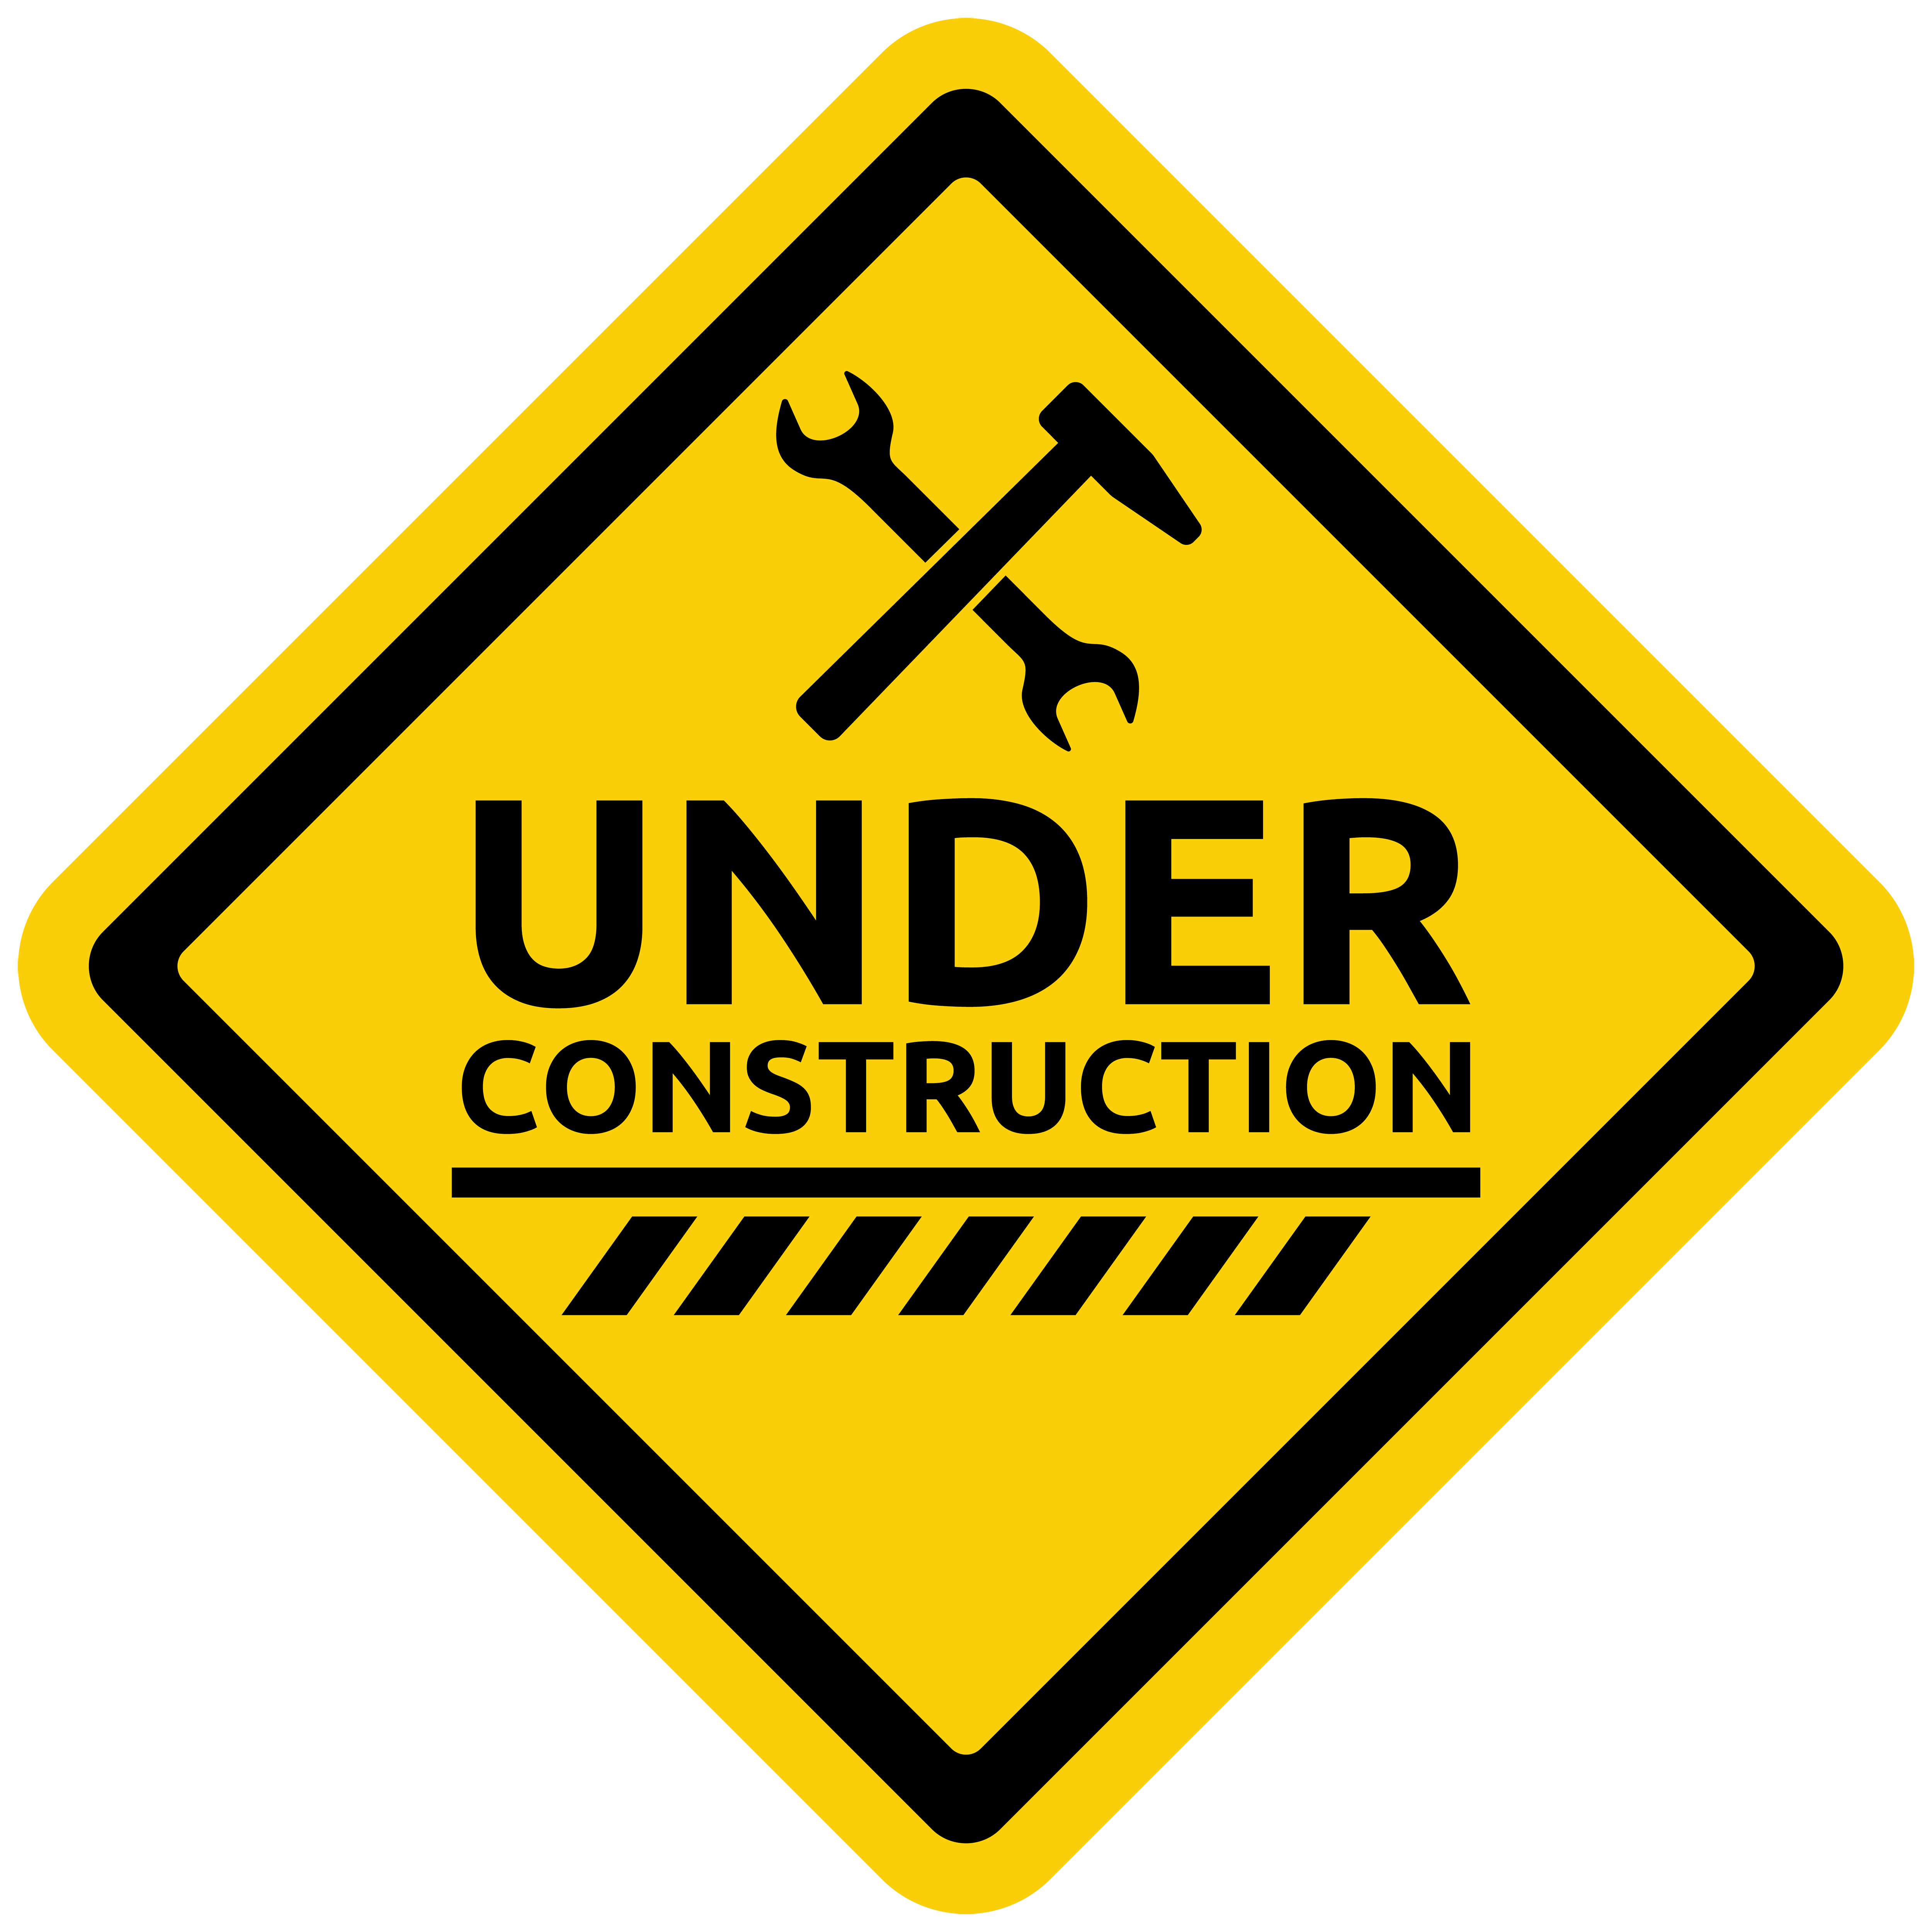 Construction Road Sign